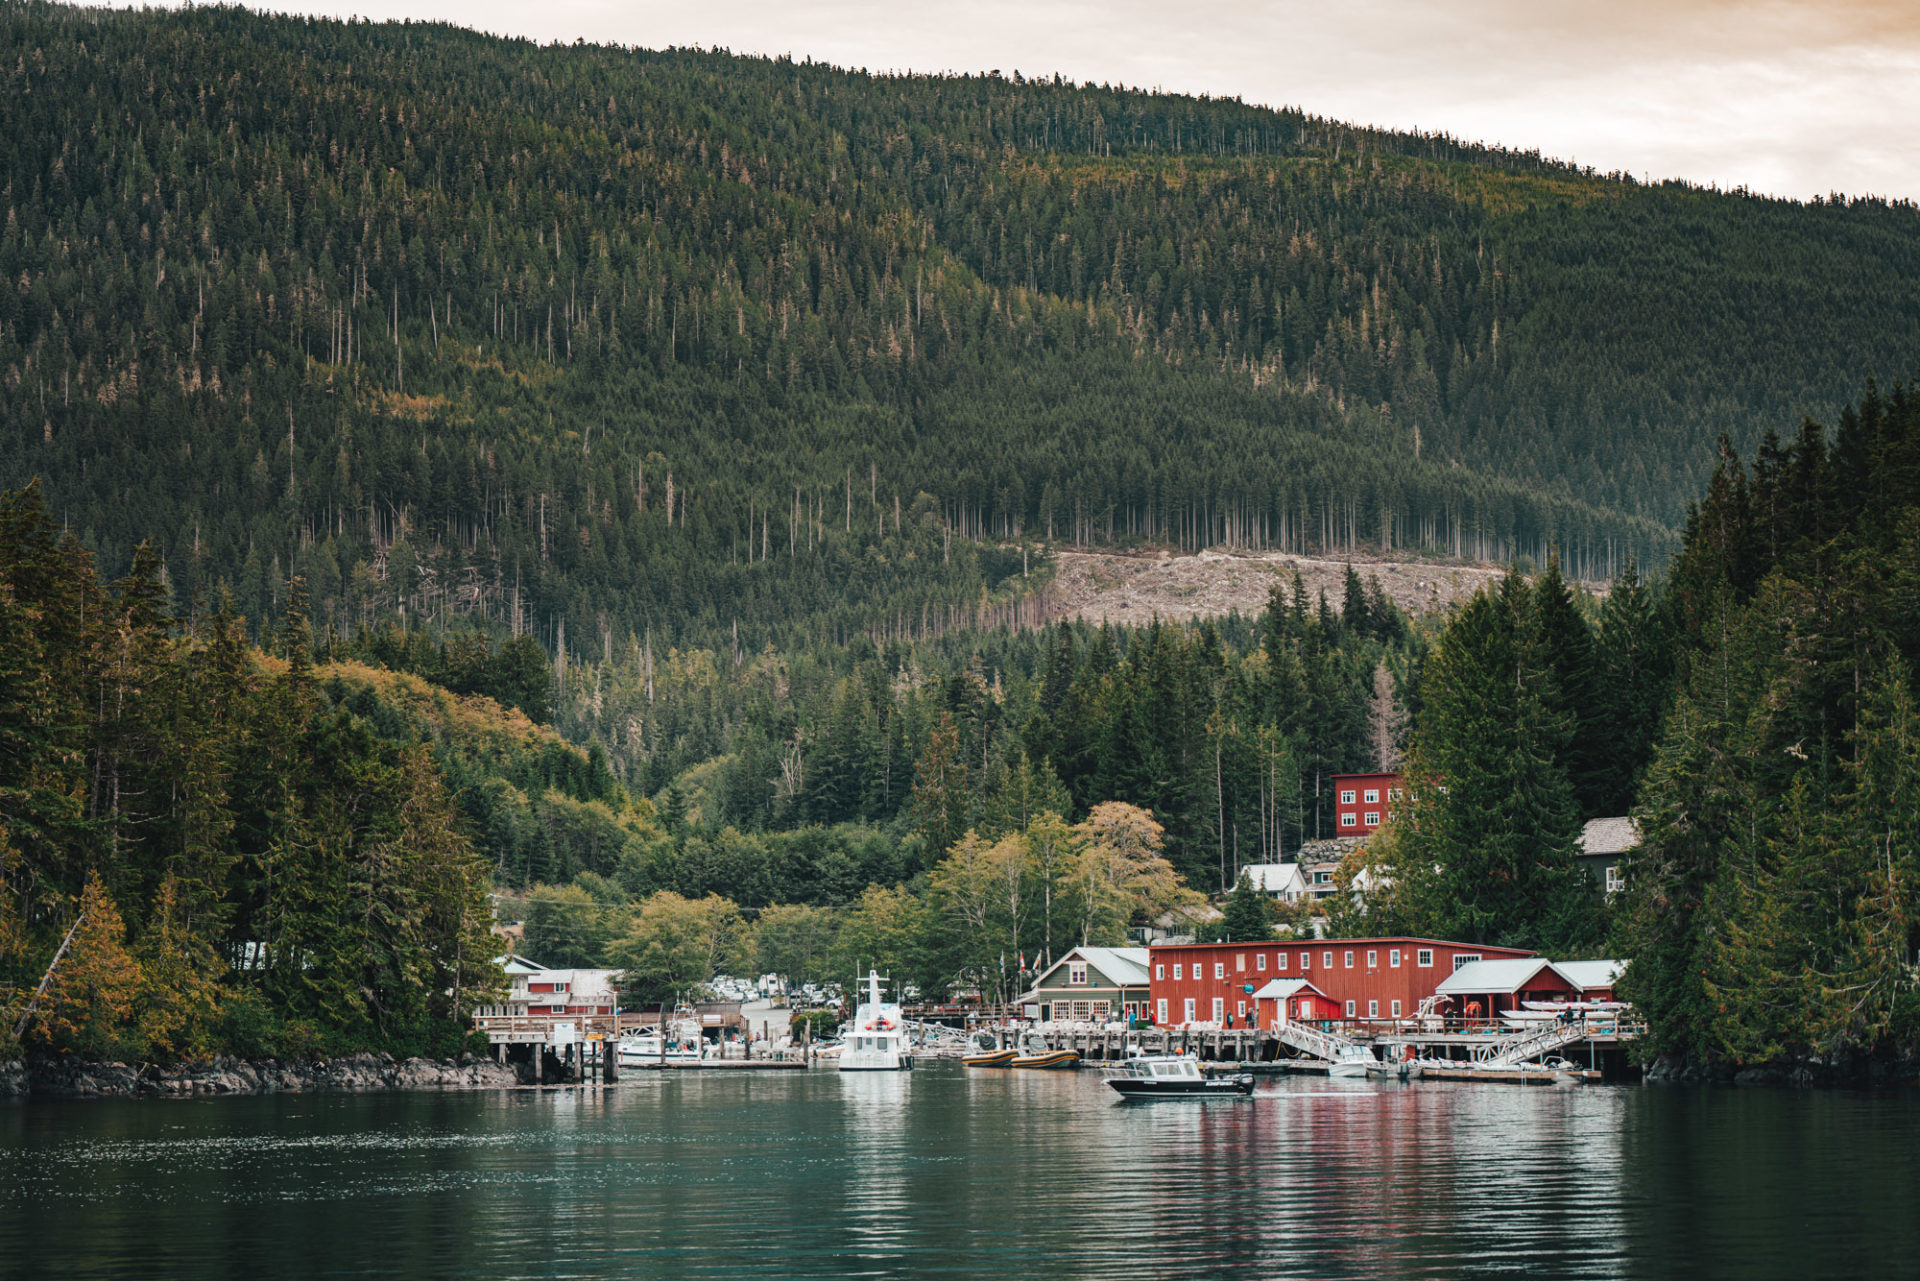 Vancouver Island Best Places to Visit for Whale Watching - Telegraph Cove